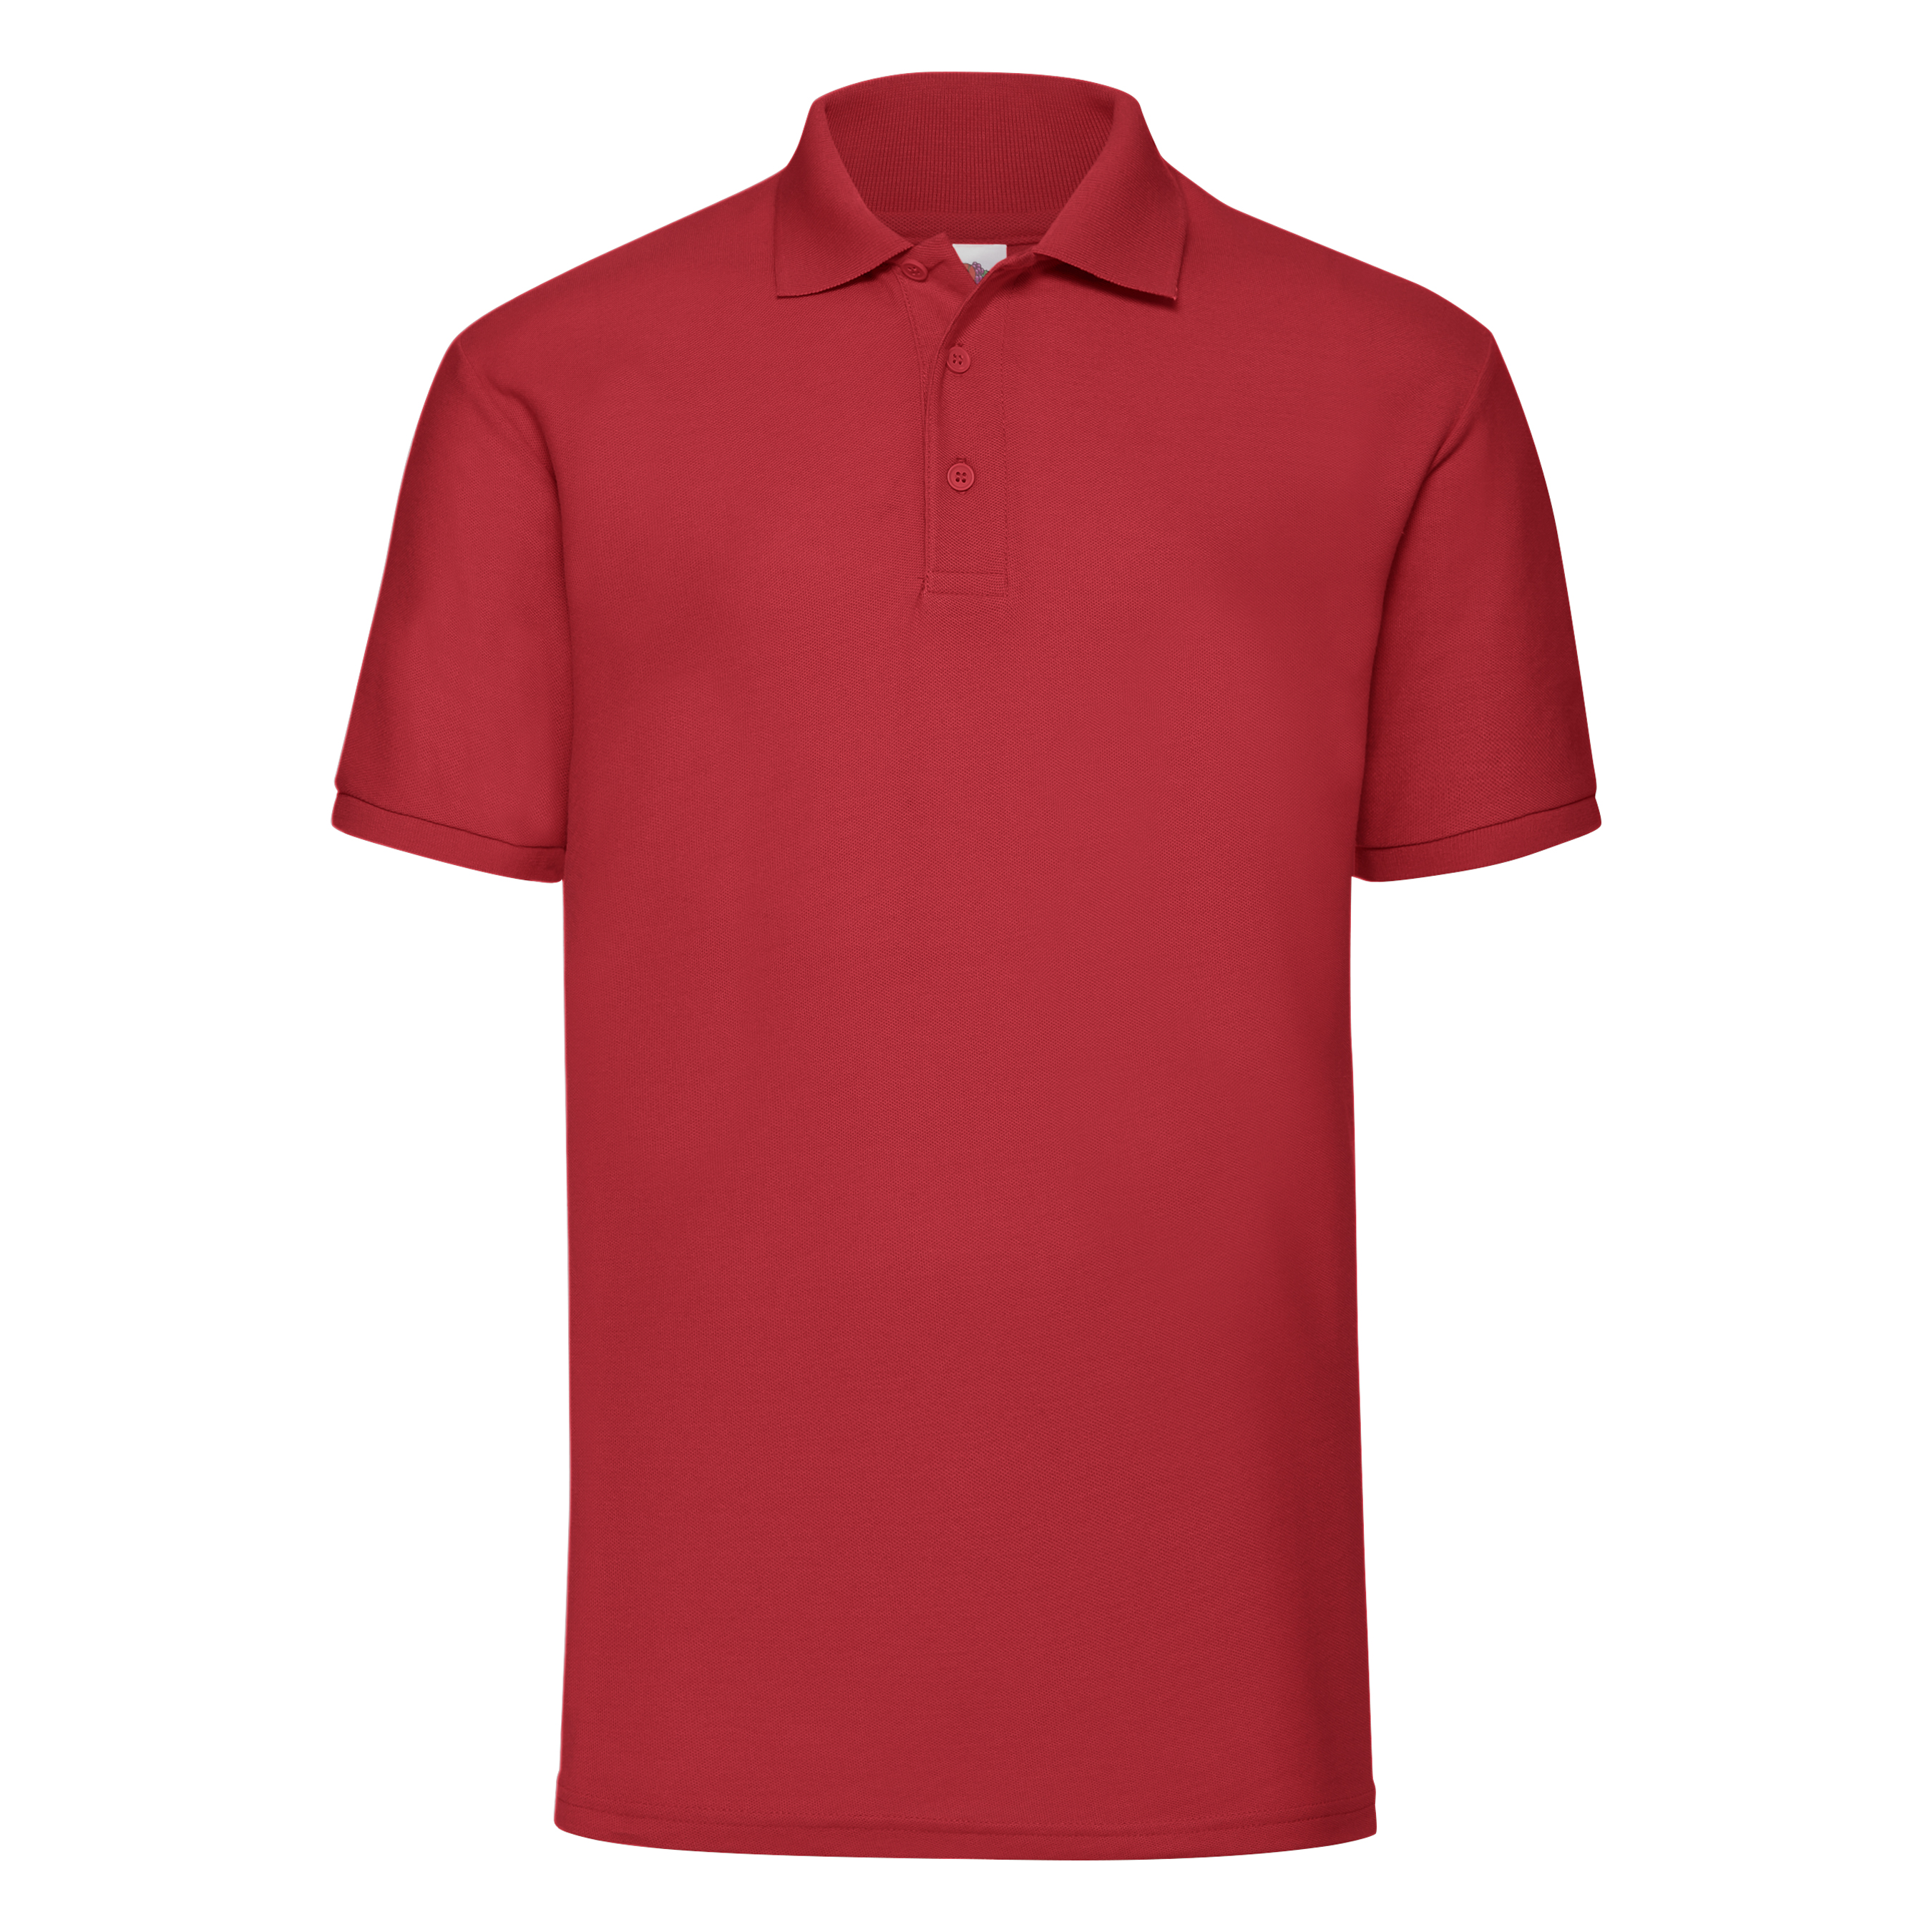 ax-httpswebsystems.s3.amazonaws.comtmp_for_downloadfruit-of-the-loom-65-35-polo-red.jpg